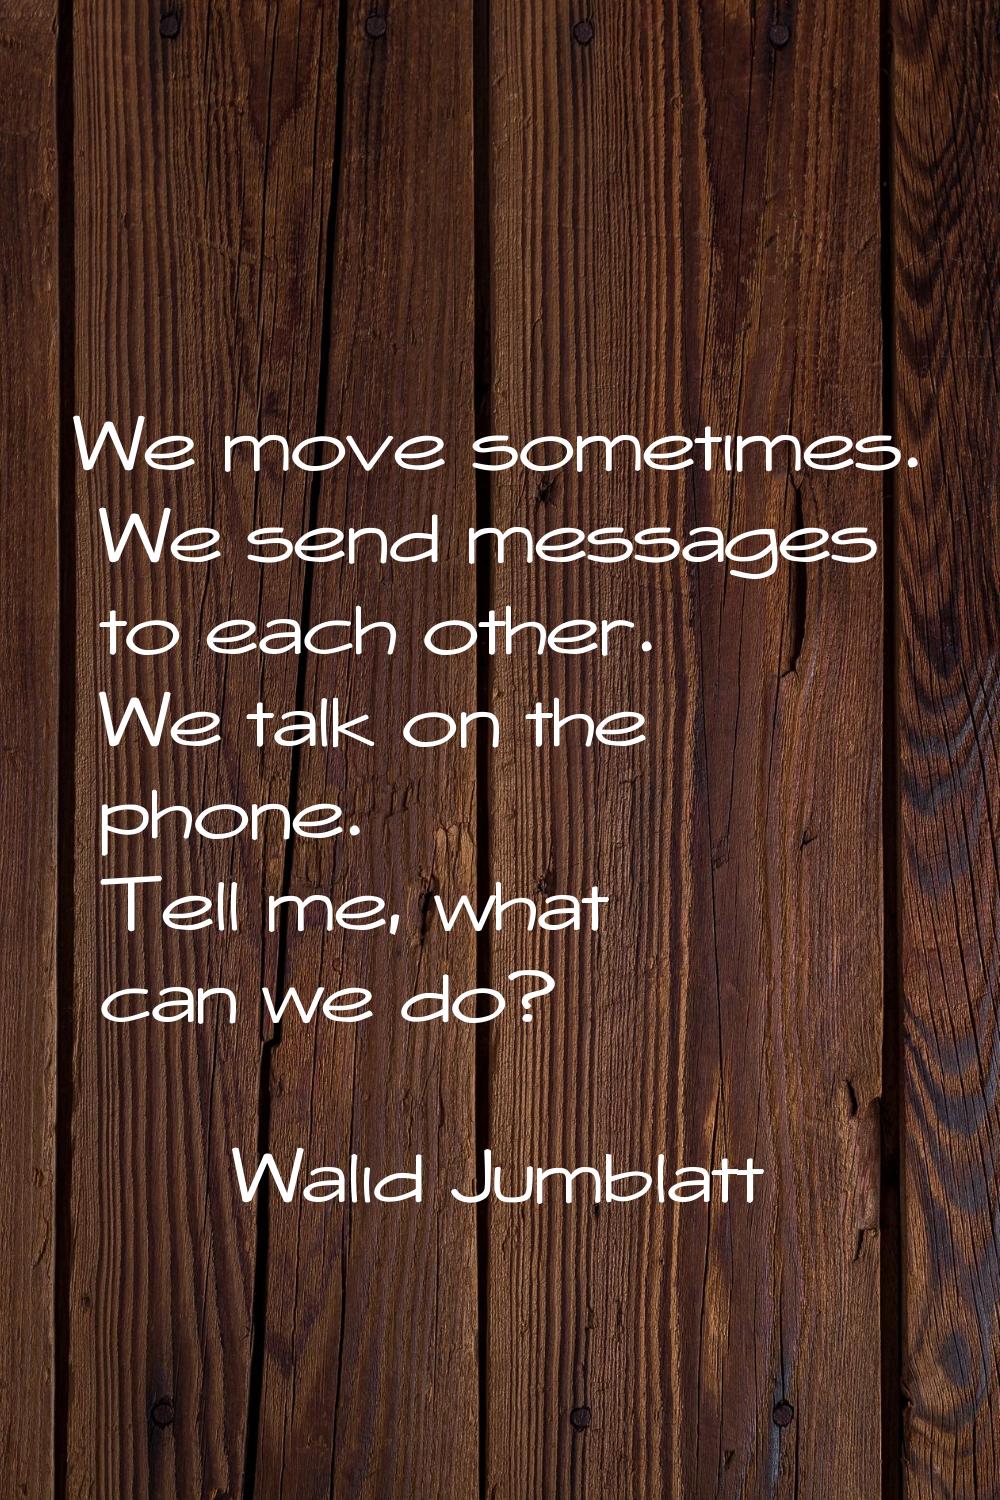 We move sometimes. We send messages to each other. We talk on the phone. Tell me, what can we do?